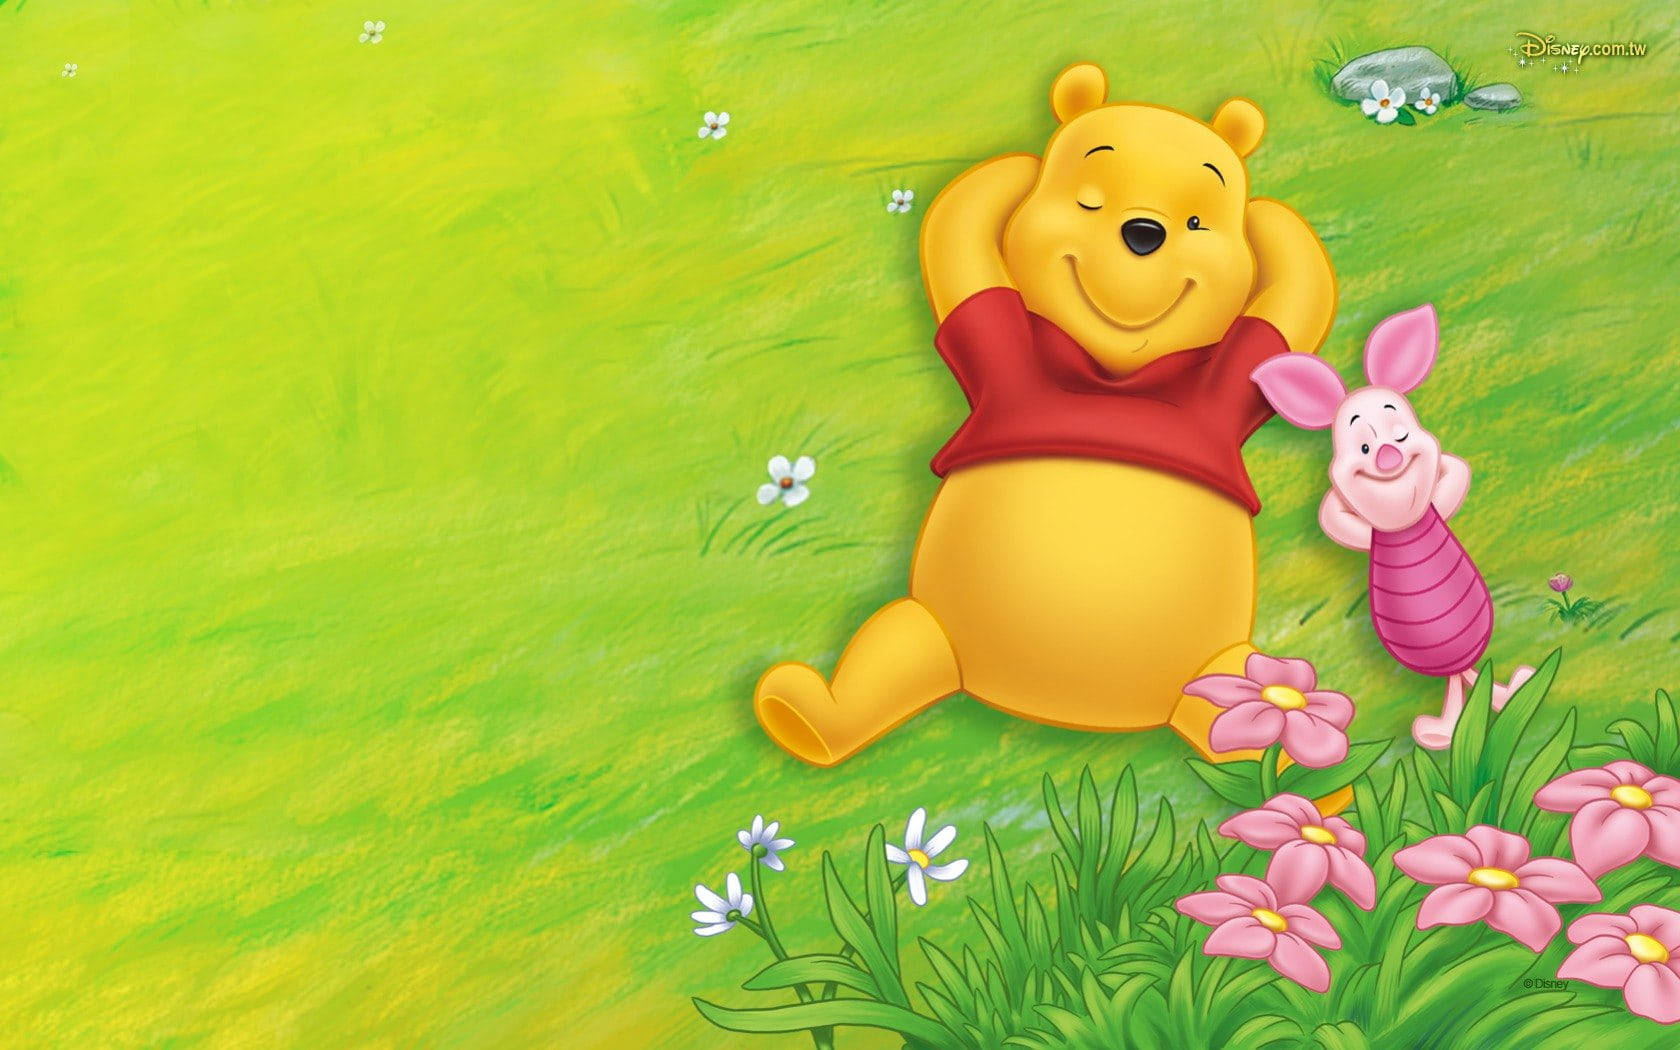 Cute Winnie The Pooh Lying In Grass Background